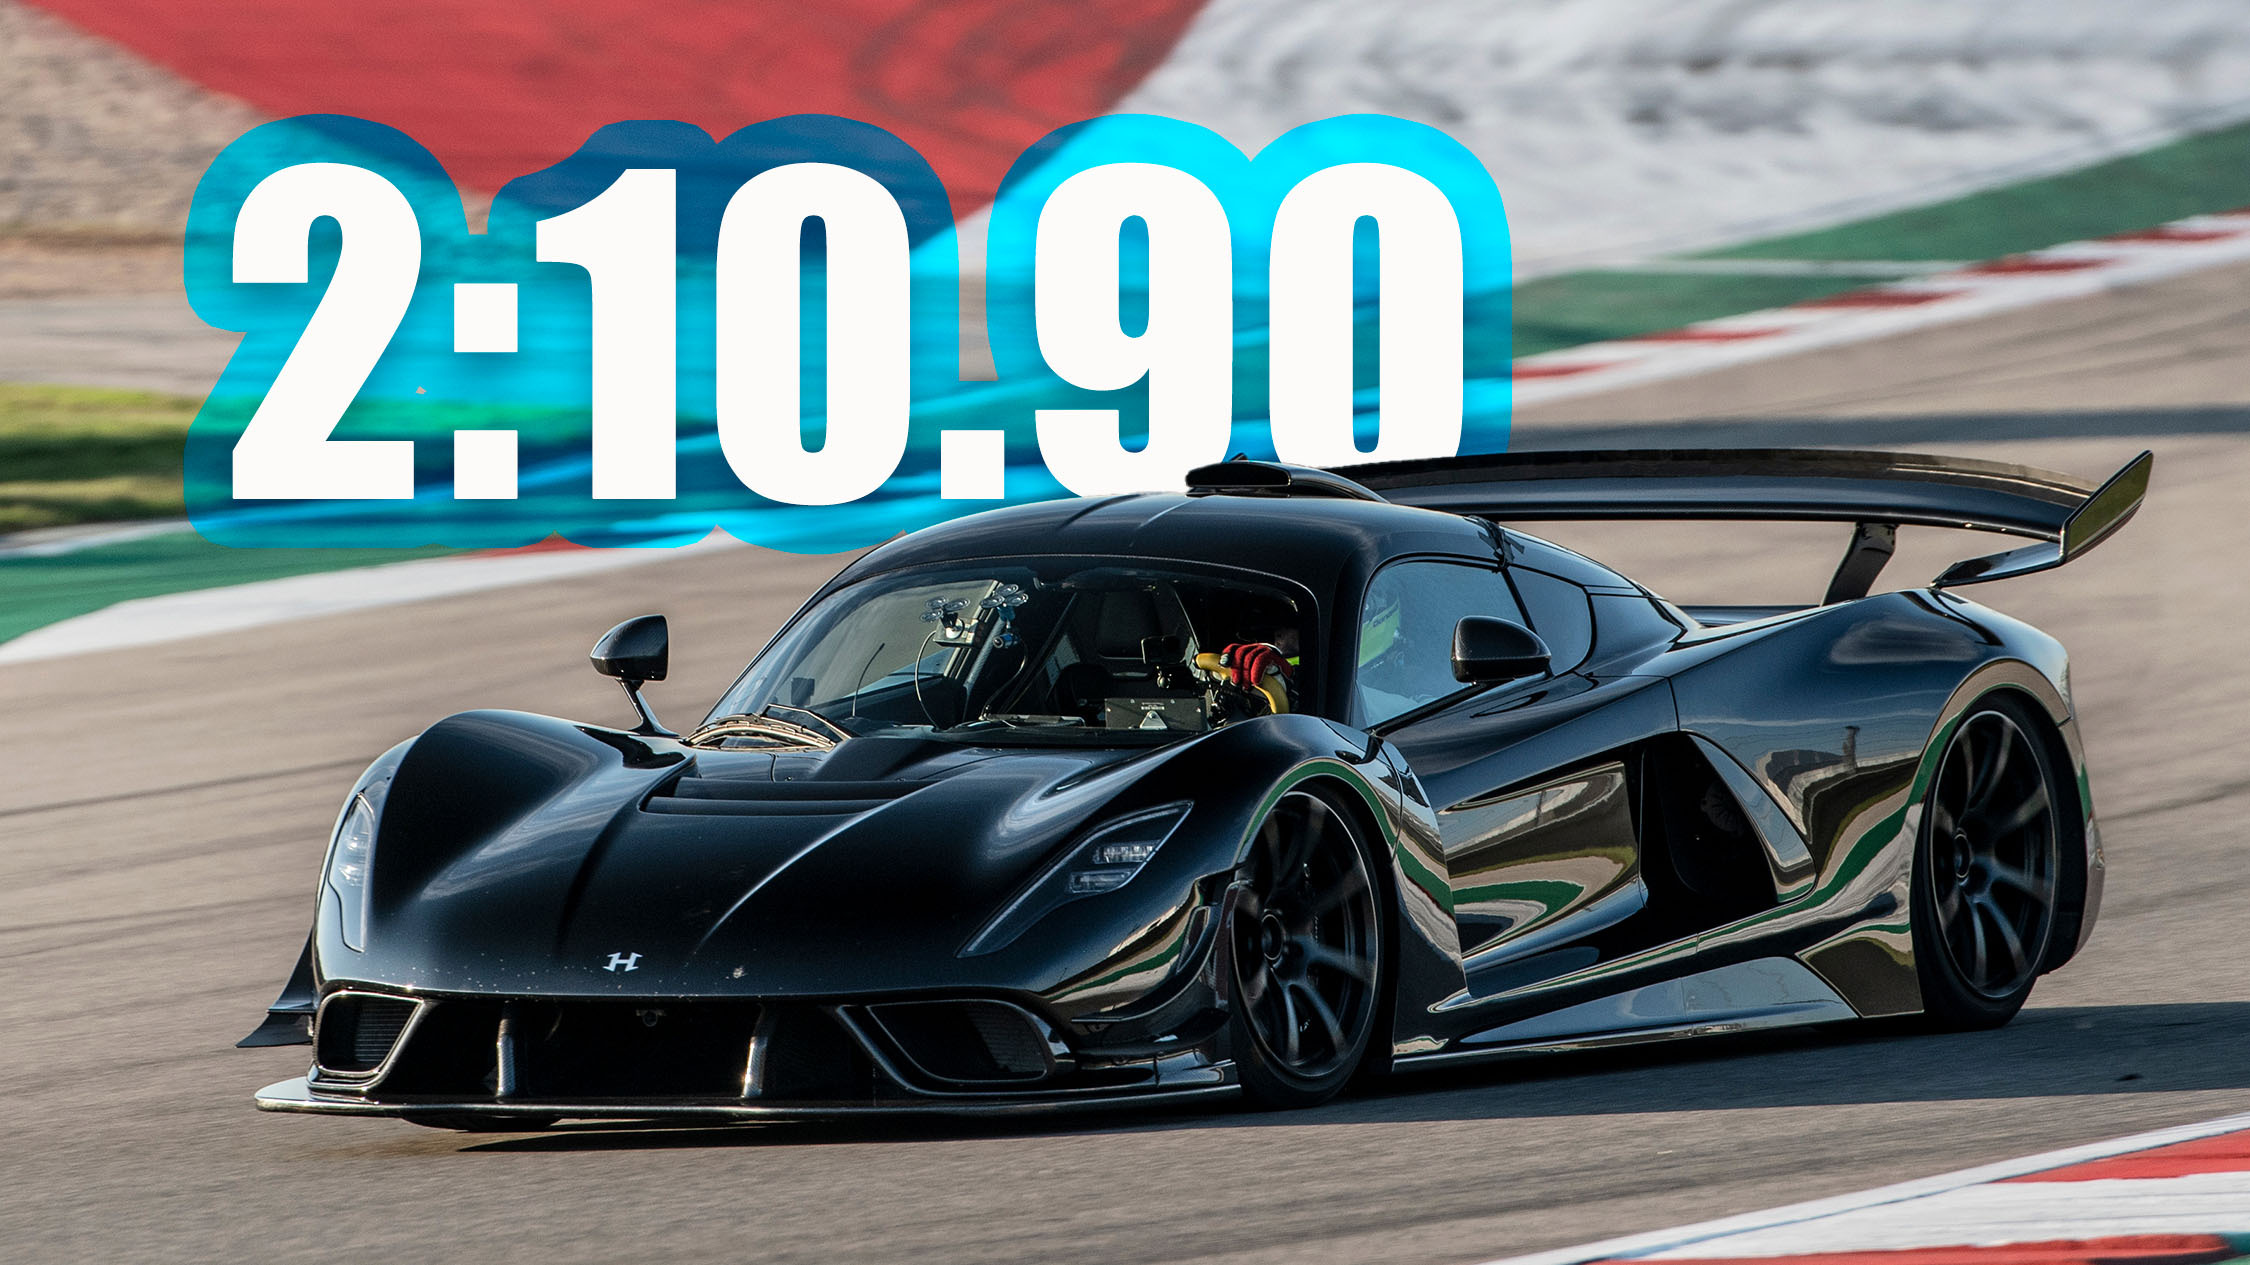 Hennessey Venom F5 Revolution Crushes COTA Record, King Reclaims Throne in Spectacular Fashion!